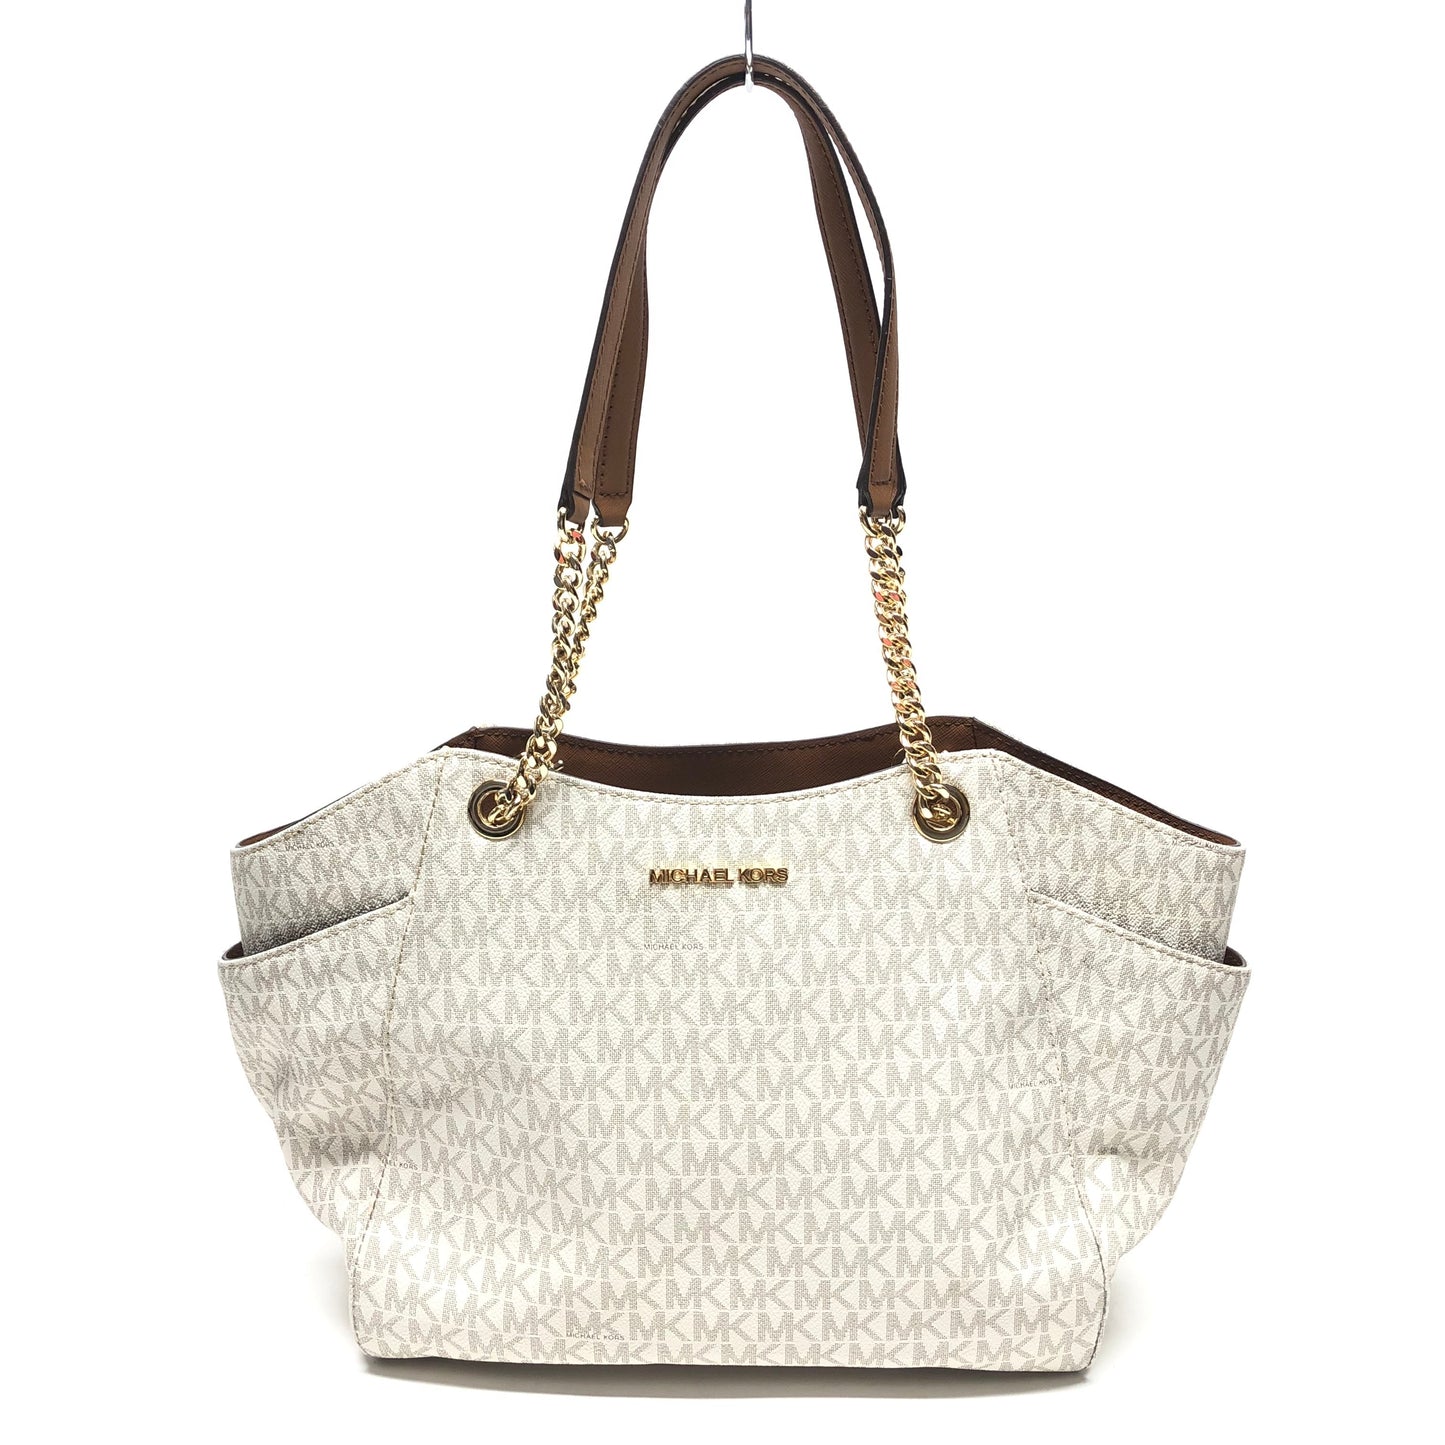 Tote Designer Michael By Michael Kors, Size Small